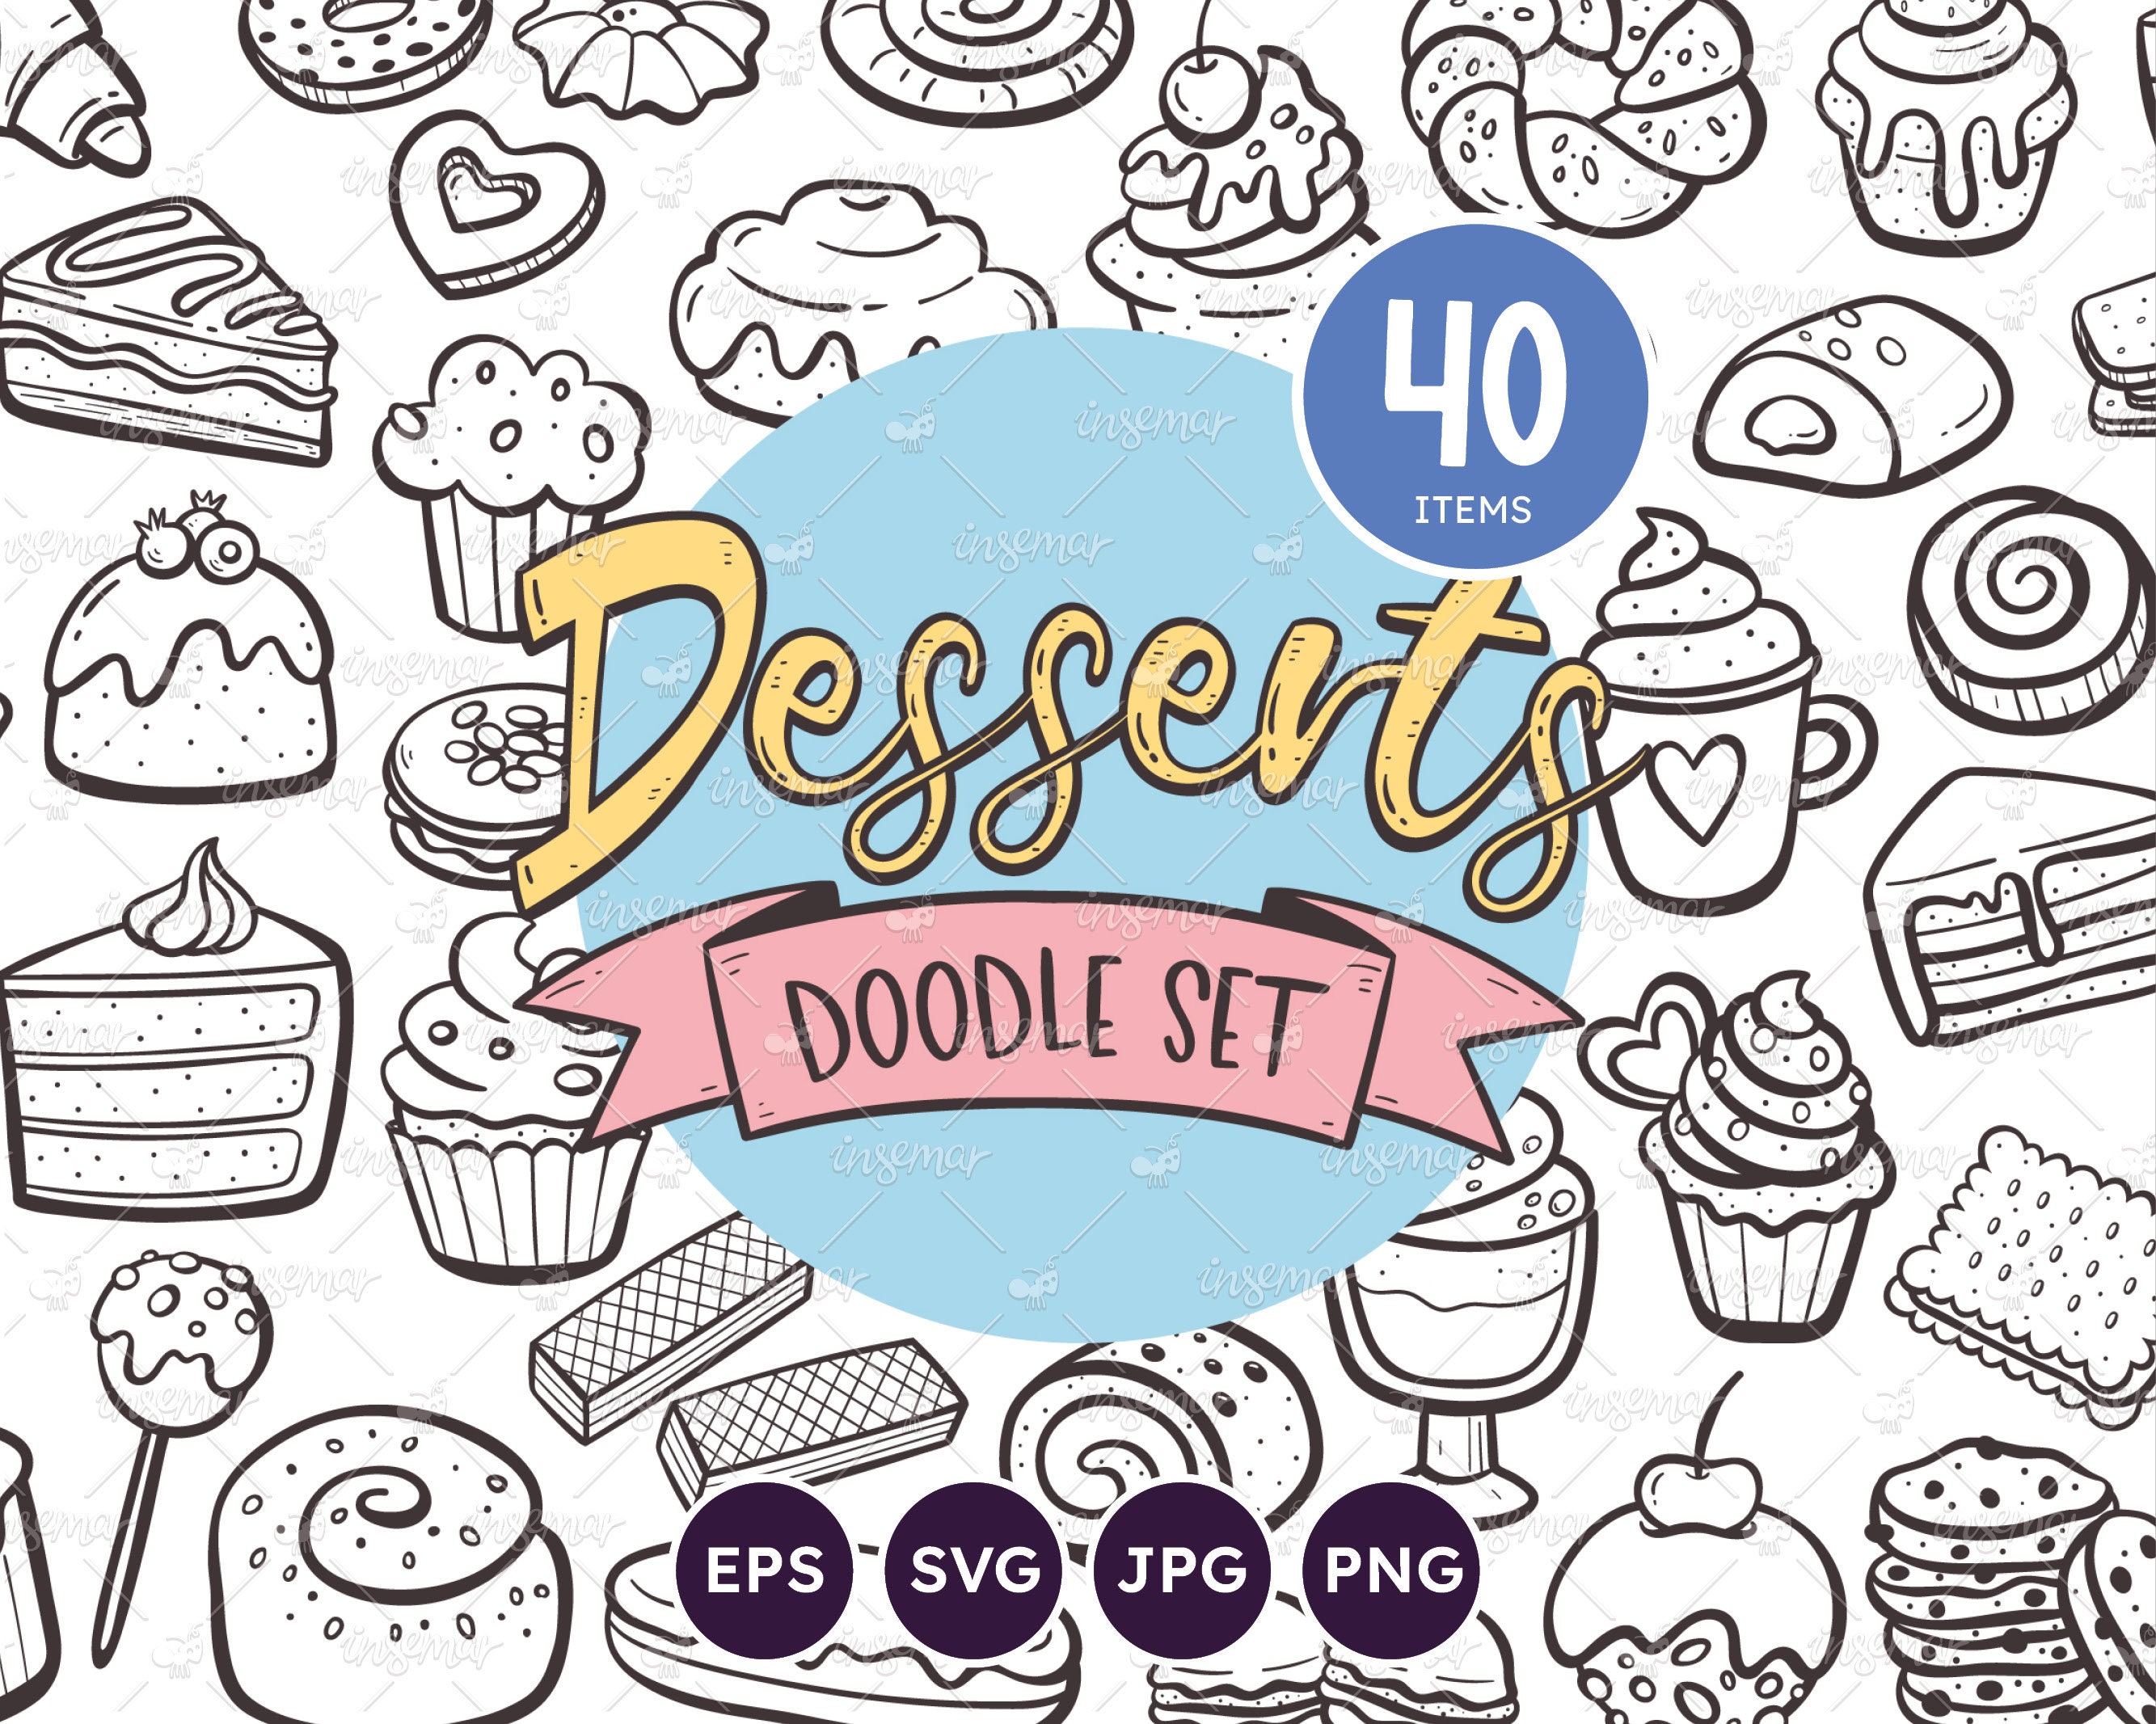 DESSERTS Cute Digital Coloring Page, Sweets Doodle Adult Coloring Book,  Printable Colouring Sheet, Instant Download!